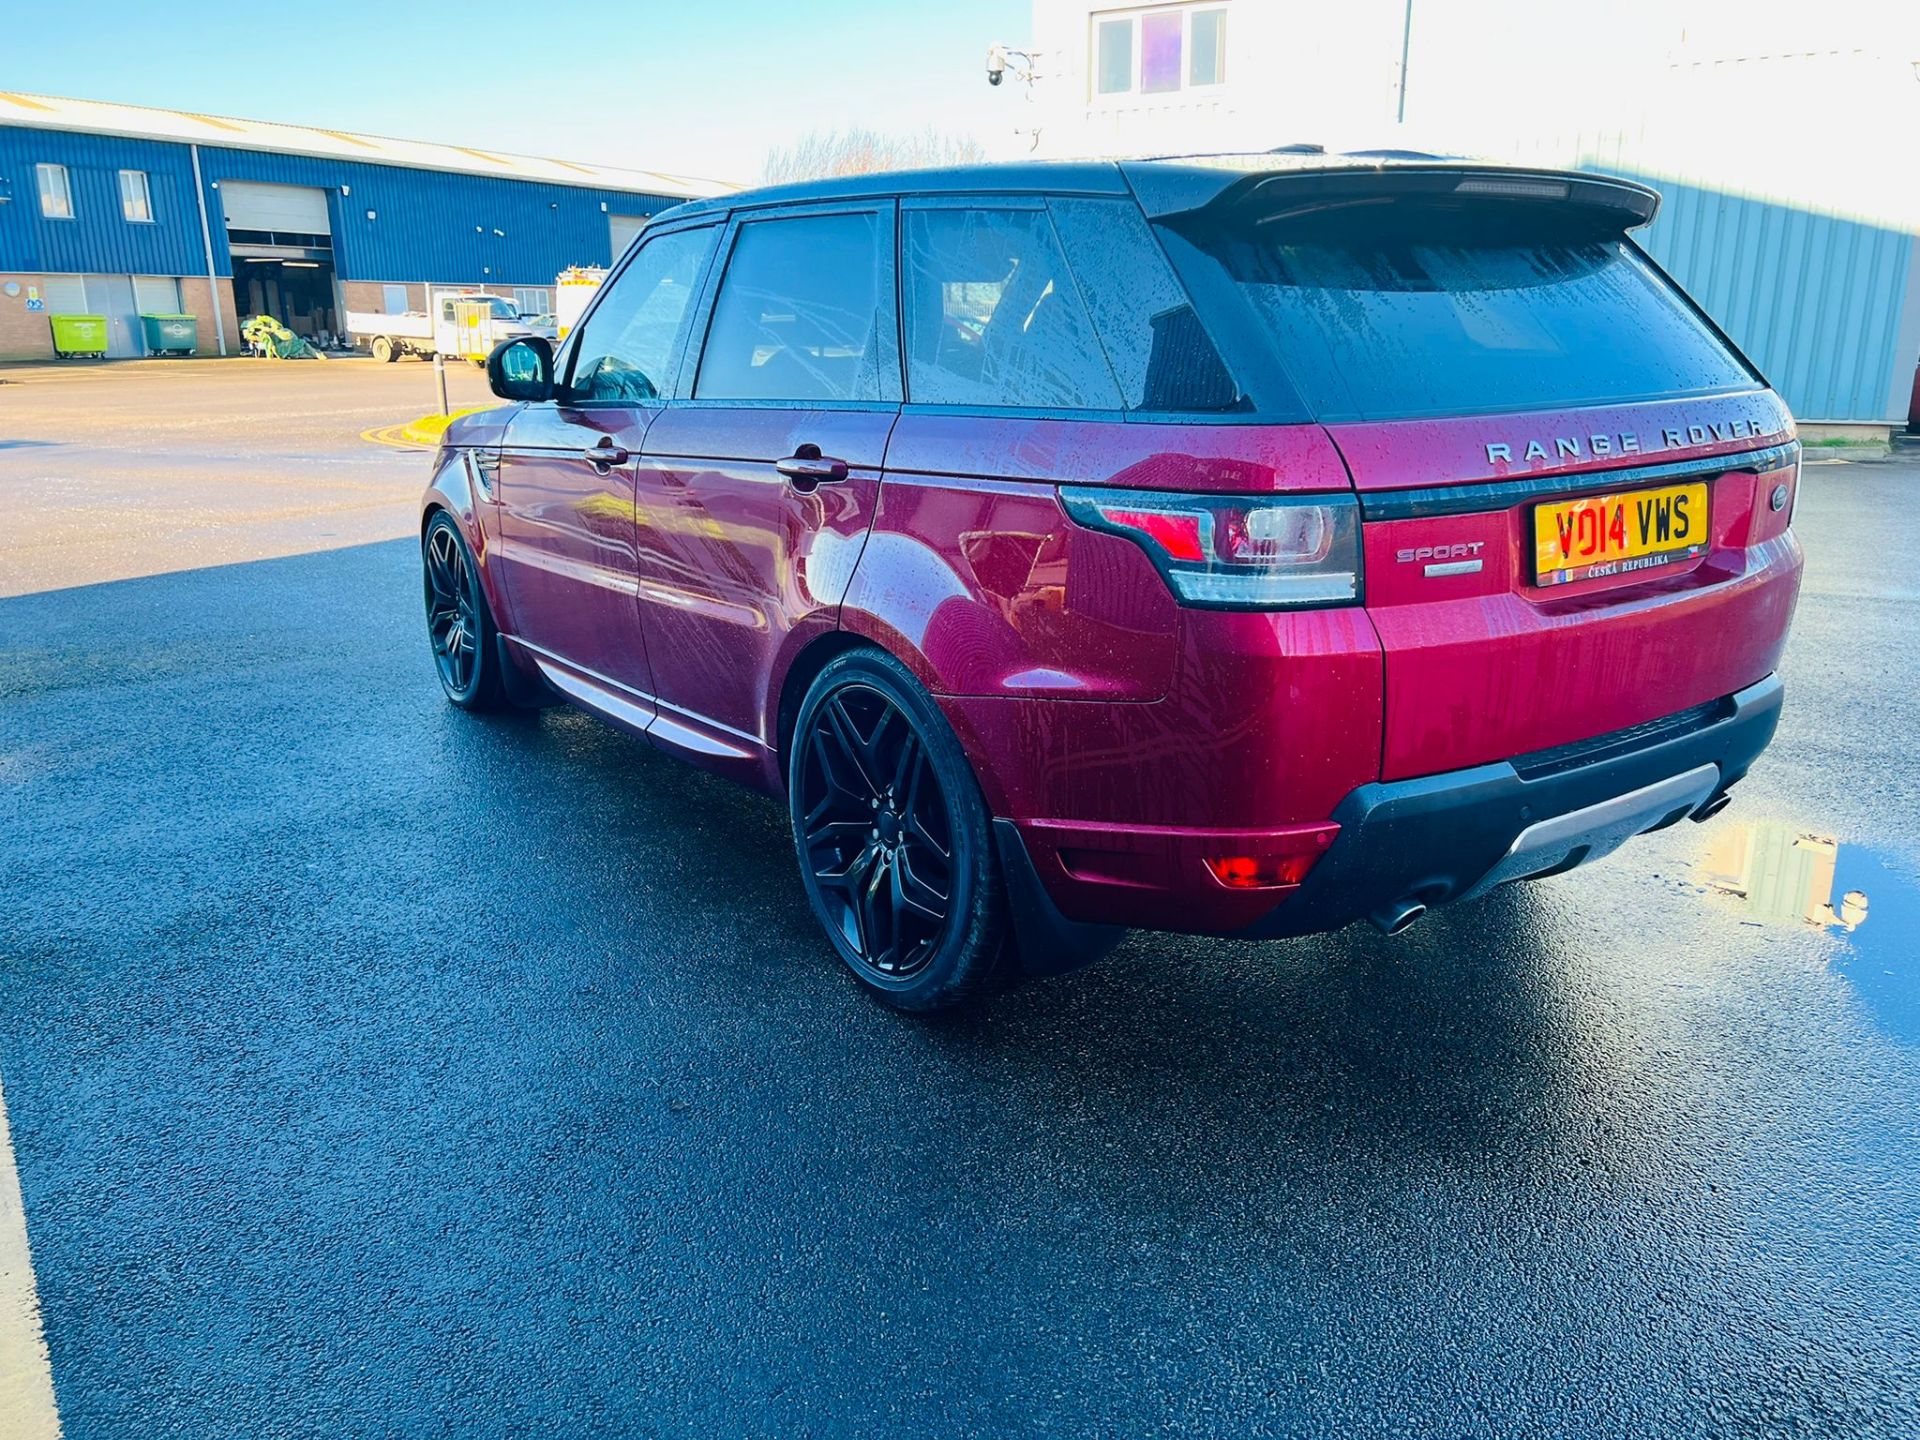 Range Rover Sport 3.0 SDV6 Autobiography Dynamic Auto Command Shift -Start/Stop- 2014 14Reg-Pan roof - Image 7 of 44